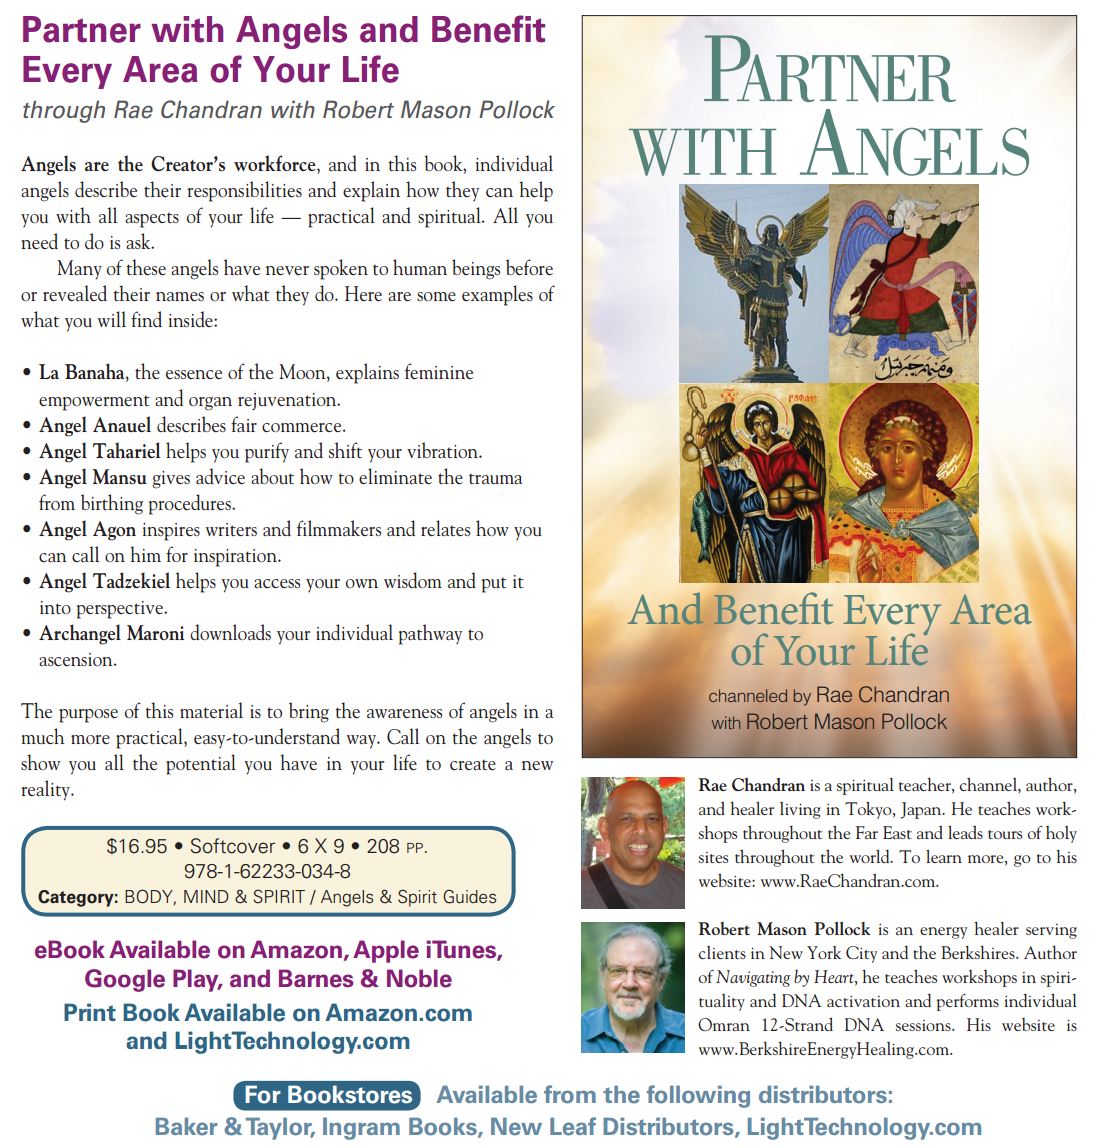 Partner with Angels book cover